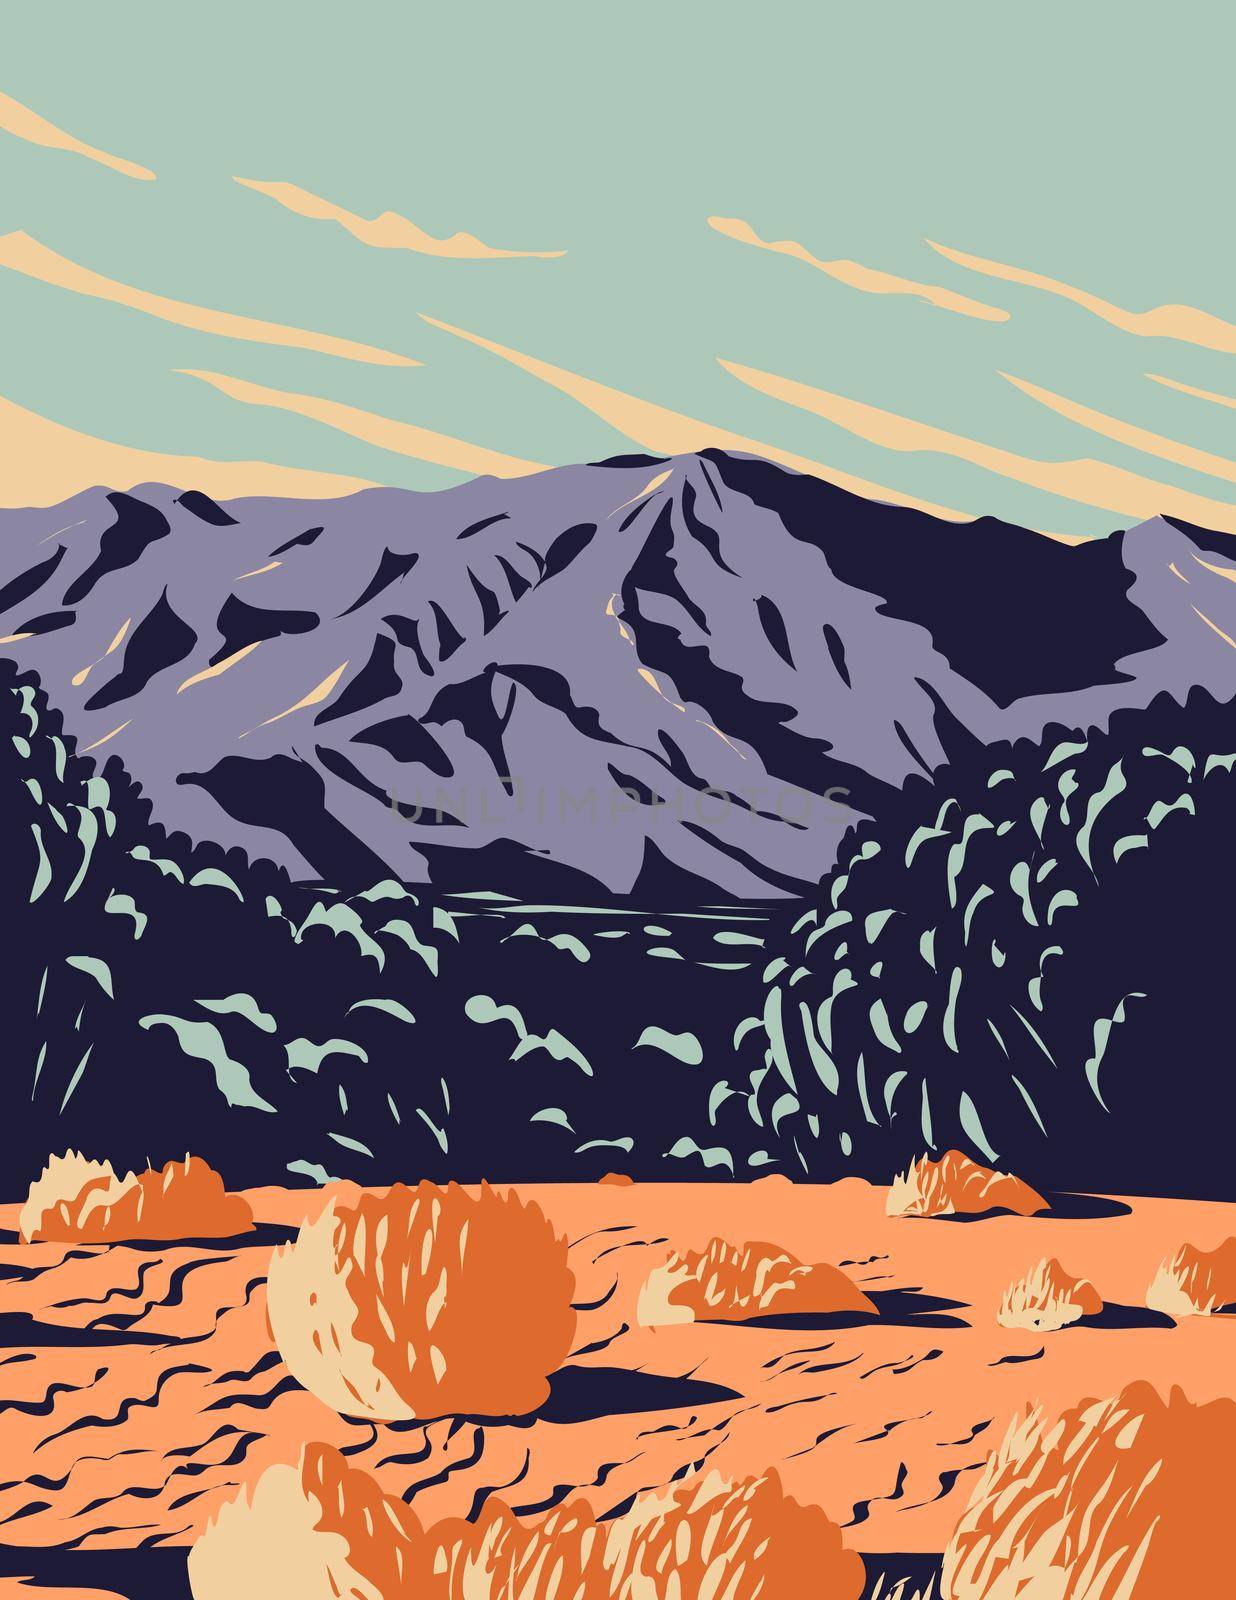 WPA Poster Art of the dramatic desert and sand dunes of Mojave Trails National Monument surrounding the Mojave National Preserve located in California done in works project administration style.